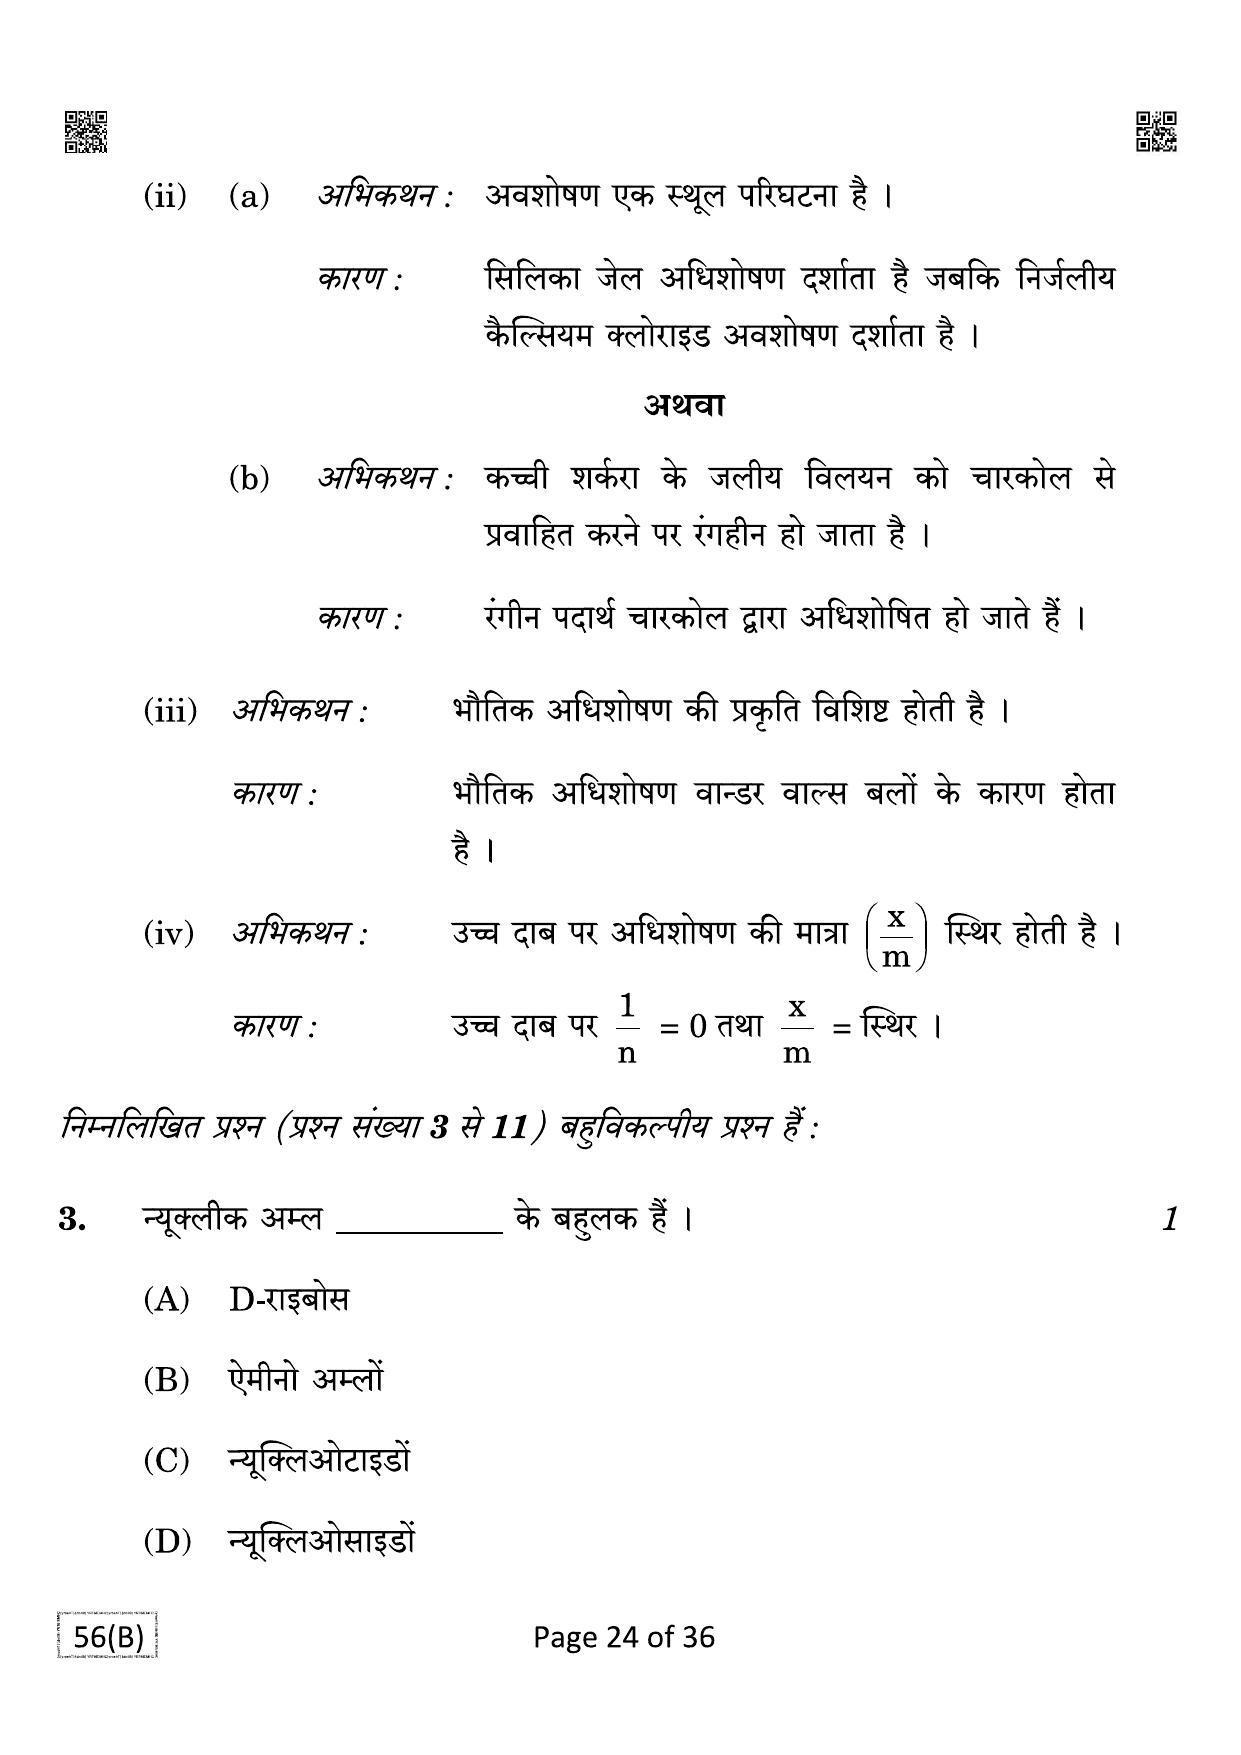 CBSE Class 12 QP_043_CHEMISTRY_FOR_BLIND_CANDIDATES 2021 Compartment Question Paper - Page 24